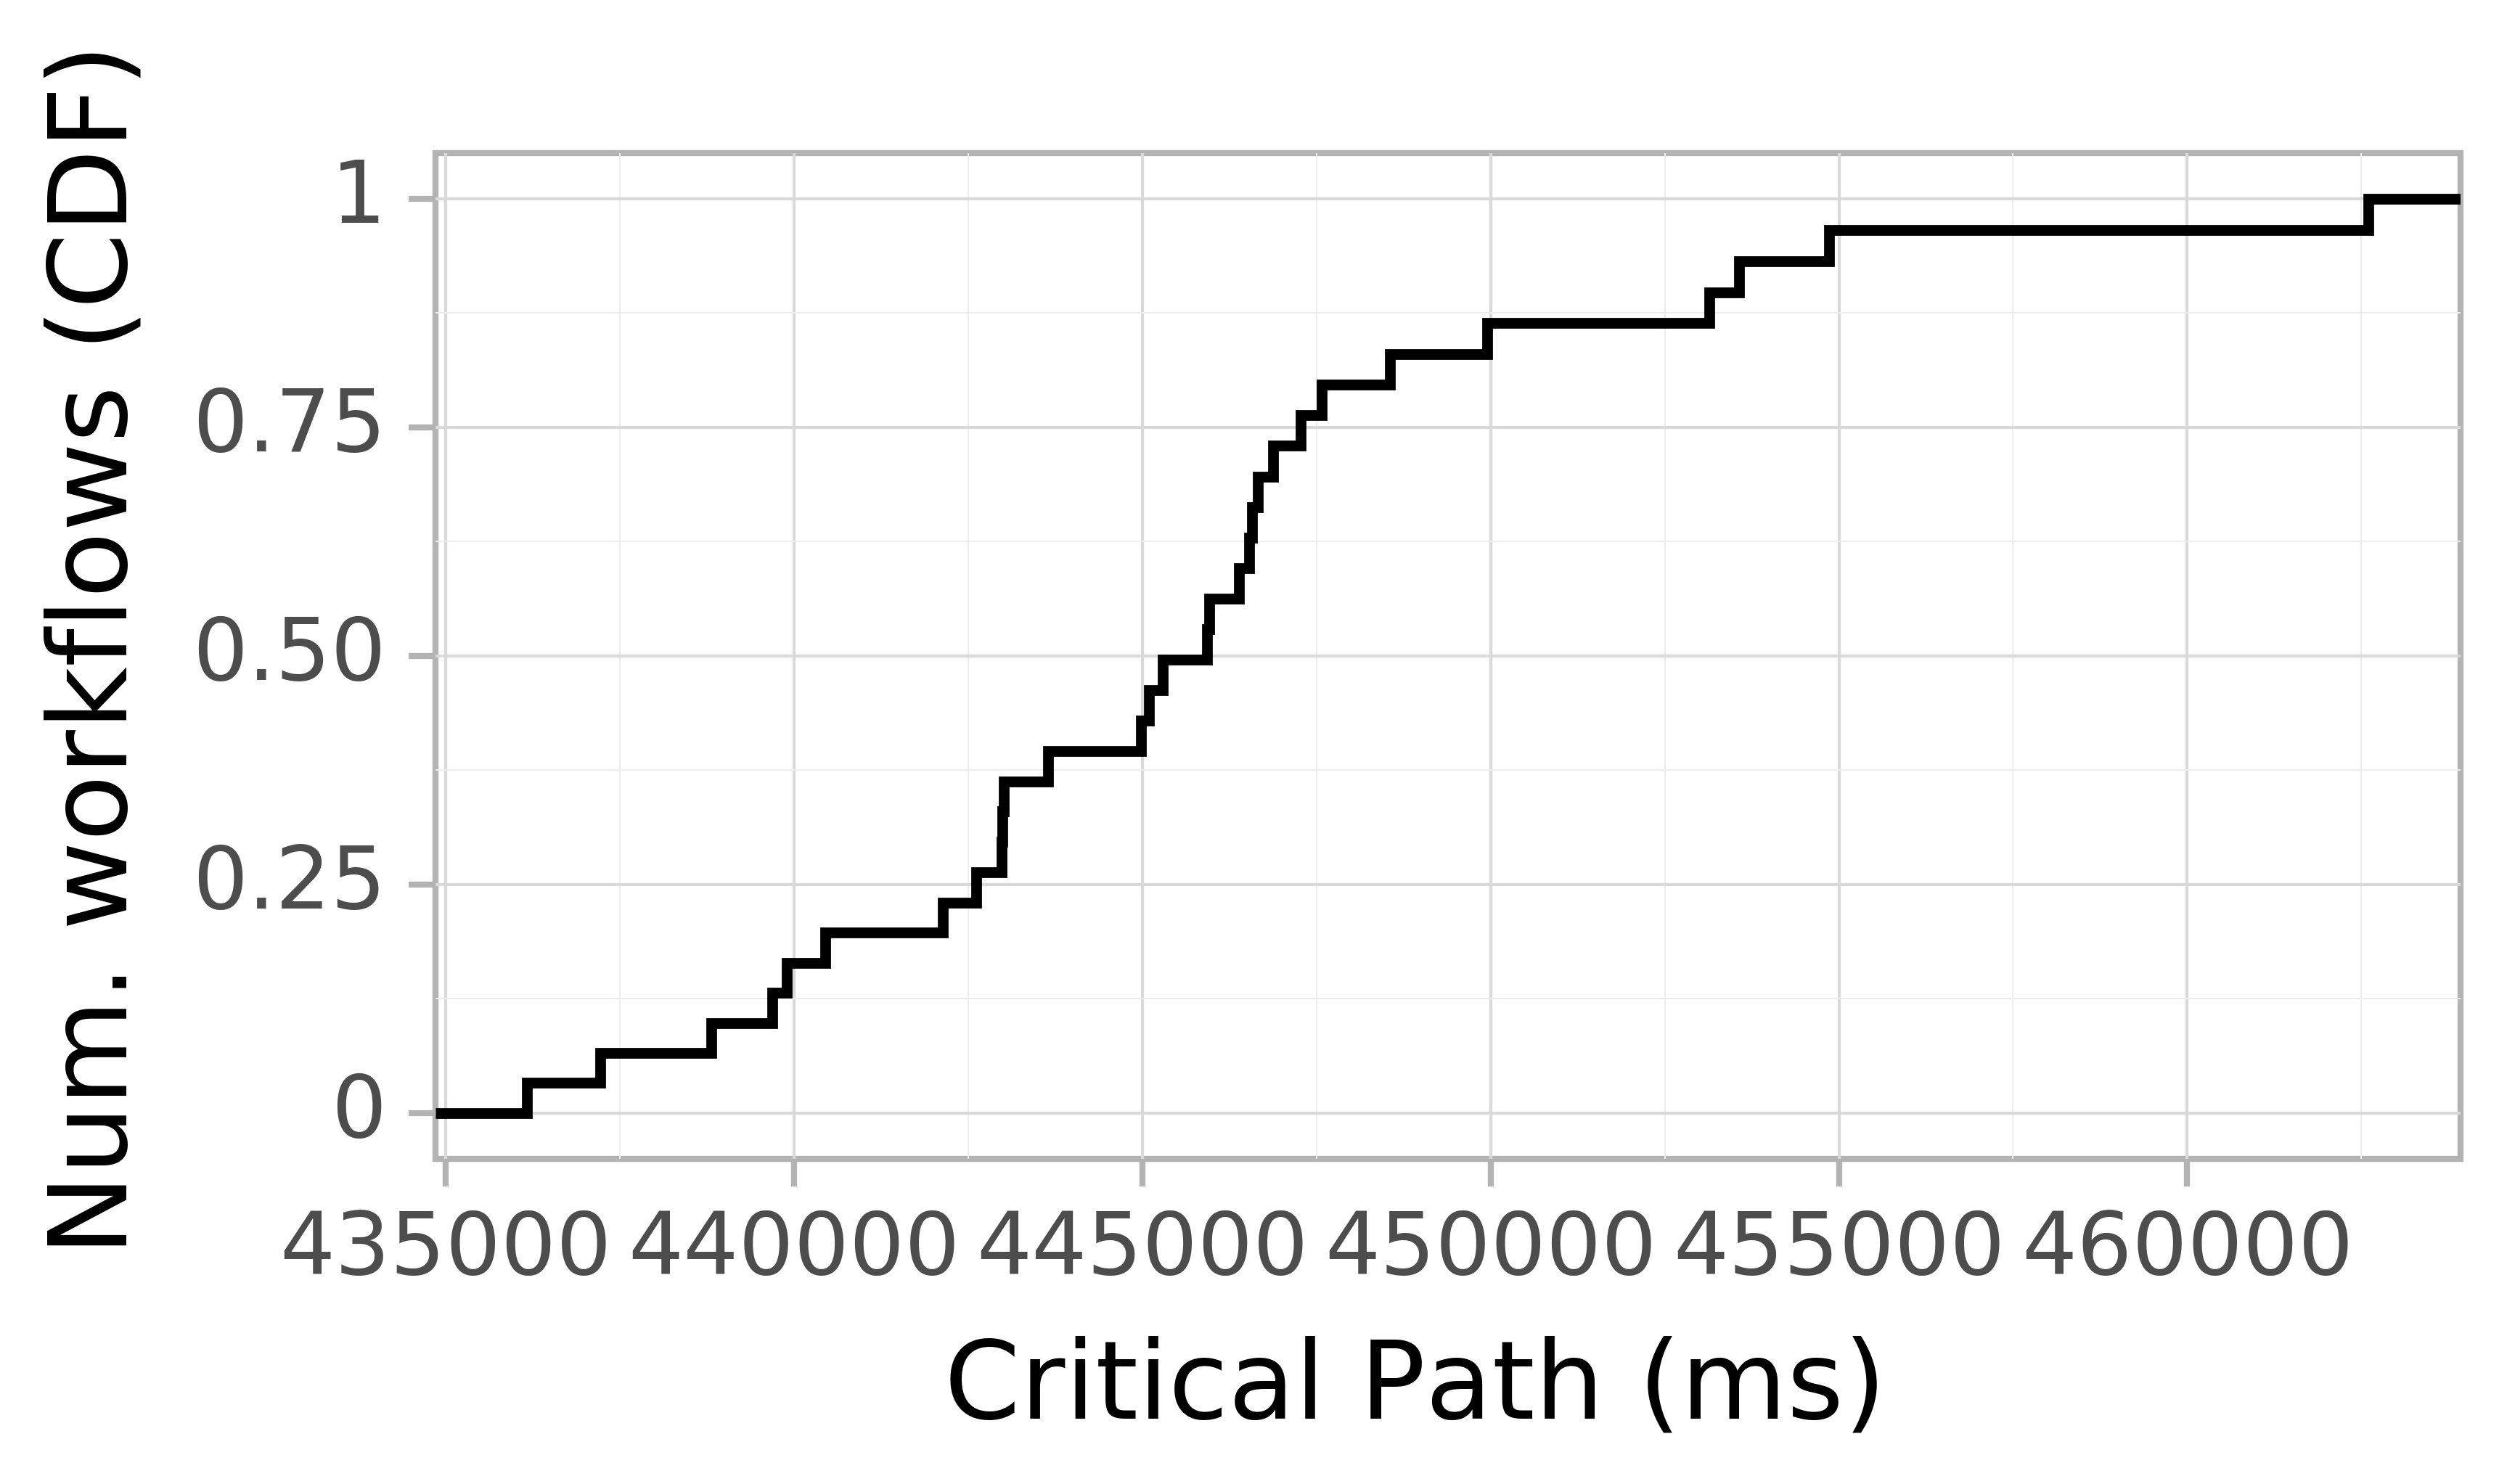 Job runtime CDF graph for the askalon-new_ee48 trace.